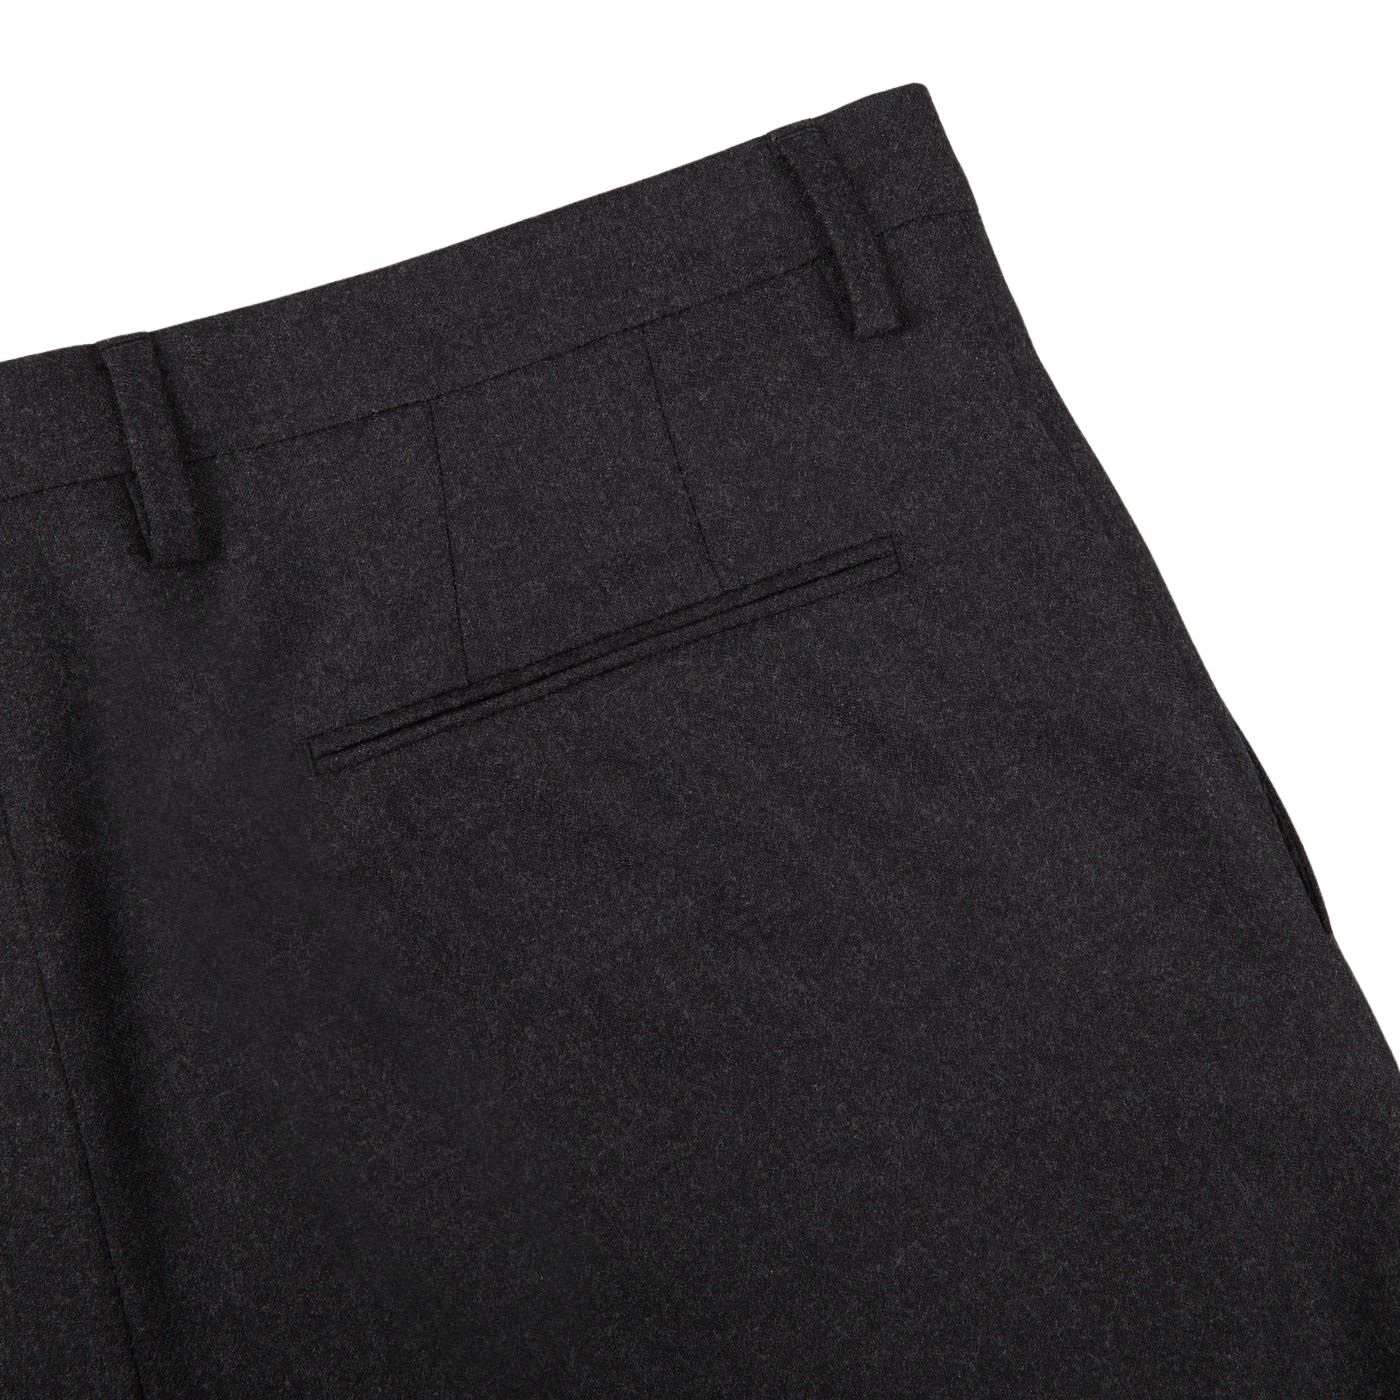 A close up of Boglioli Charcoal Grey Wool Flannel K Suit suit pants made of flannel fabric.